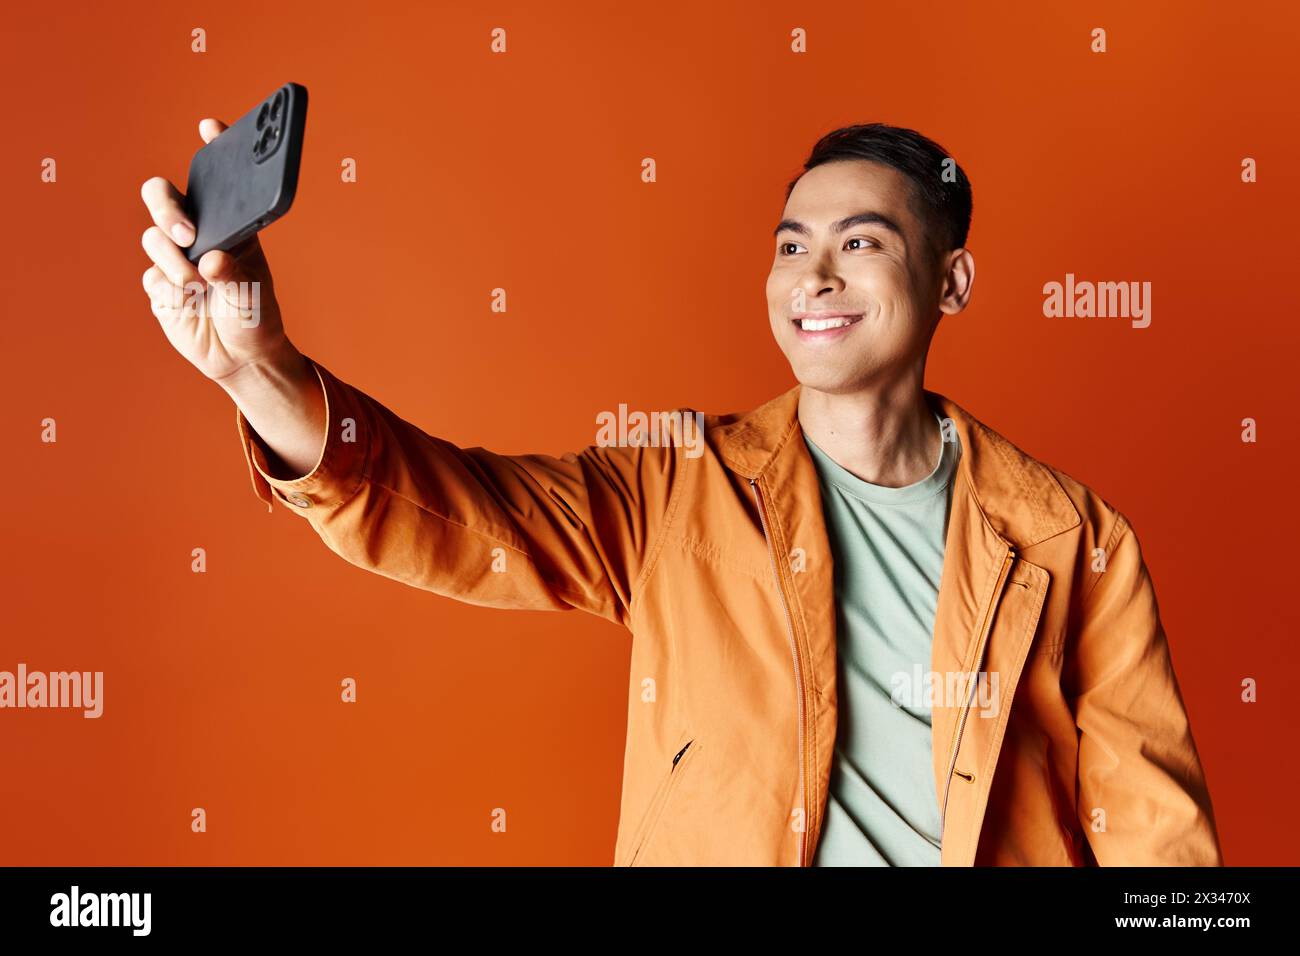 happy Asian man in stylish attire taking a selfie with his cell phone against an orange studio background. Stock Photo